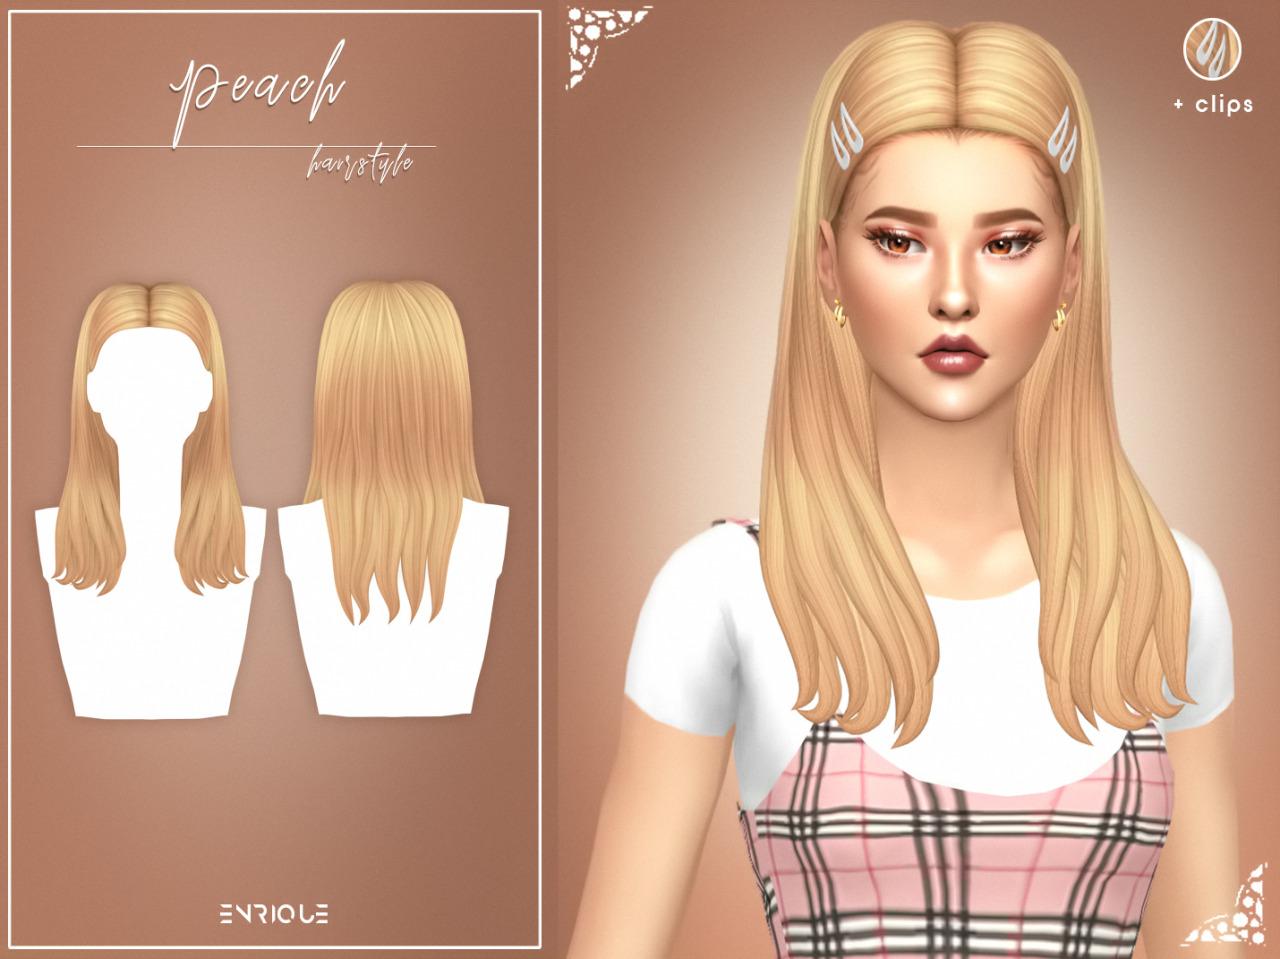 [EnriqueS4] Peach Hairstyle• New Mesh
• 18 EA Swatches
• All Lods
• Base Game Compatible
• Include Clips (Hat Category) 25 Swatches (Palette credits to @ayoshi)
• Works with hats
• Teen to Elder
• Hope you like it!
• Date for free release:...